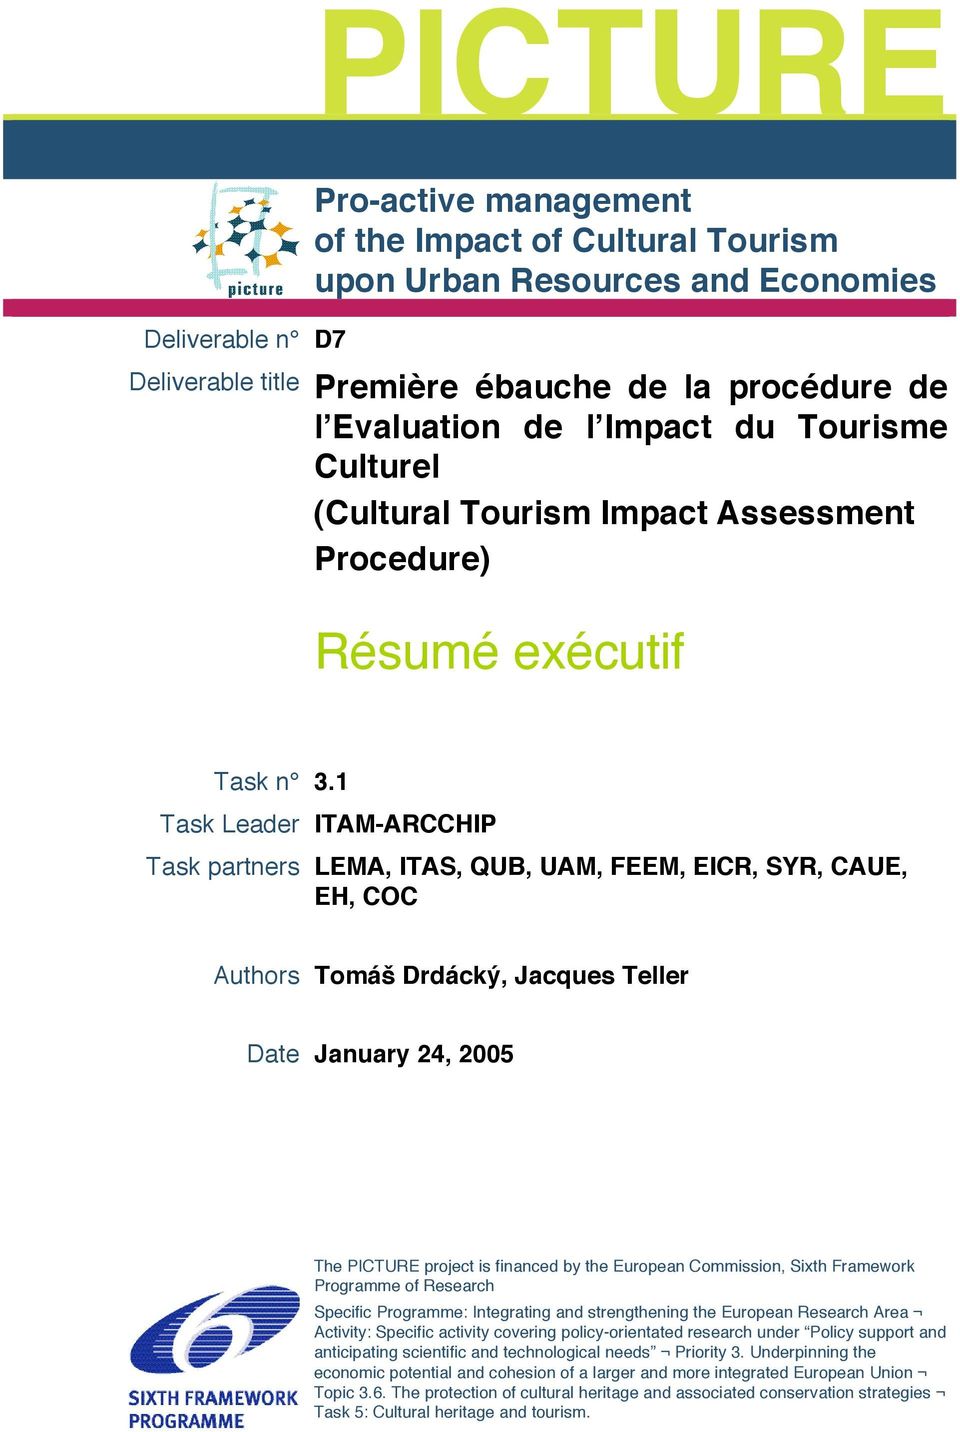 1 Task Leader ITAM-ARCCHIP Task partners LEMA, ITAS, QUB, UAM, FEEM, EICR, SYR, CAUE, EH, COC Authors Tomáš Drdácký, Jacques Teller Date January 24, 2005 The PICTURE project is financed by the